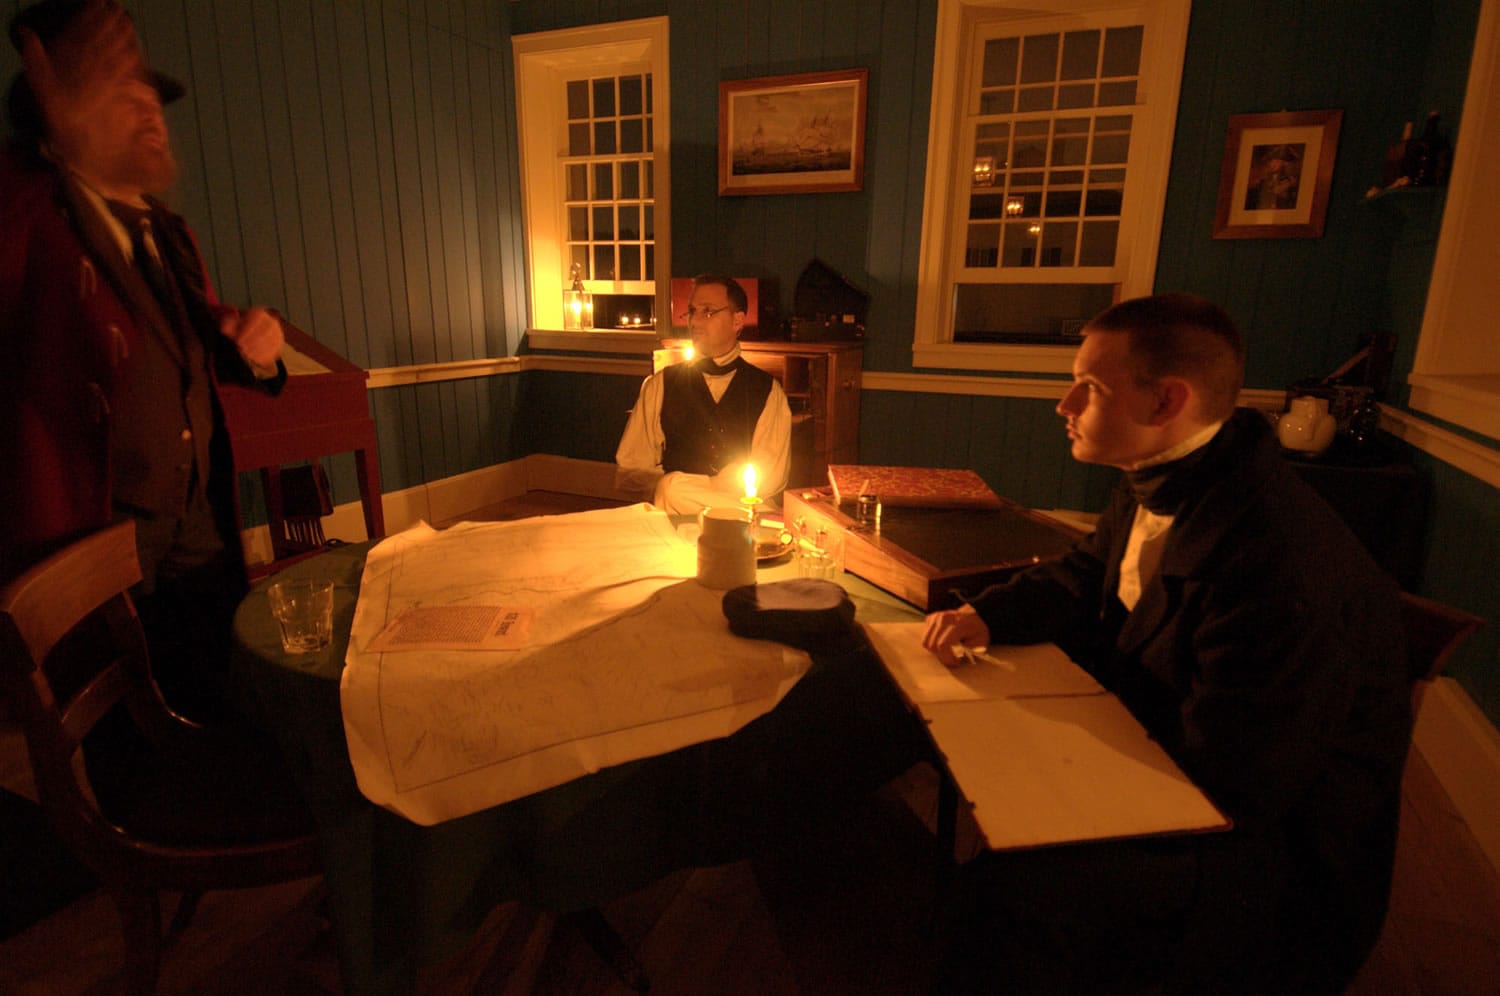 Actors portray life in the 1830s to 1850s through a series of vignettes during a Fort Vancouver lantern tour.